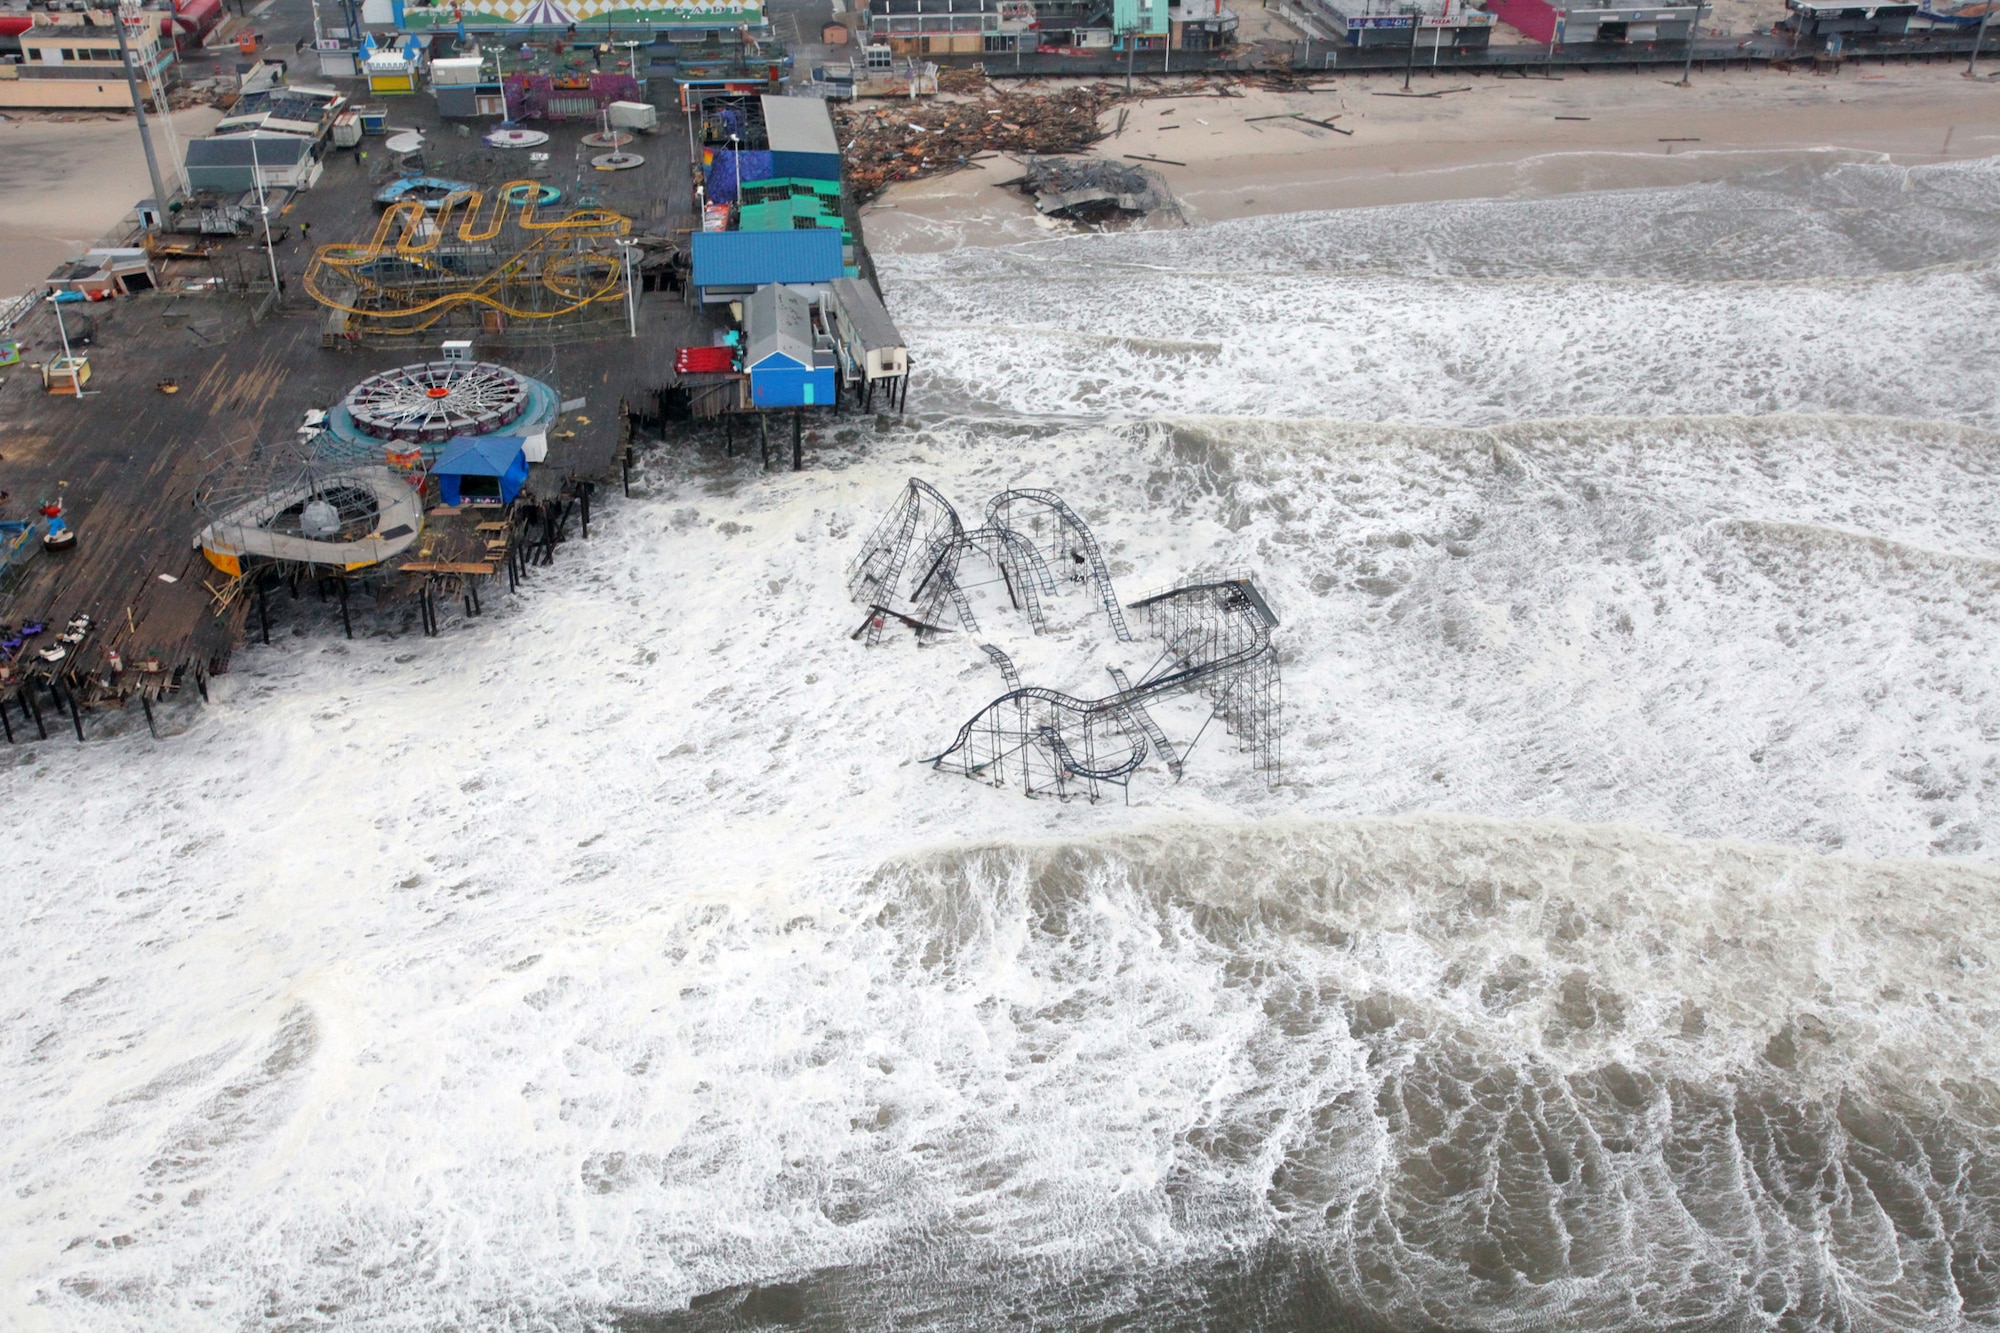 Aerial views of the damage caused by Hurricane Sandy to the New Jersey coast taken during a search and rescue mission by 1-150 Assault Helicopter Battalion, New Jersey Army National Guard, Oct. 30, 2012.  (U.S. Air Force photo/Master Sgt. Mark C. Olsen)